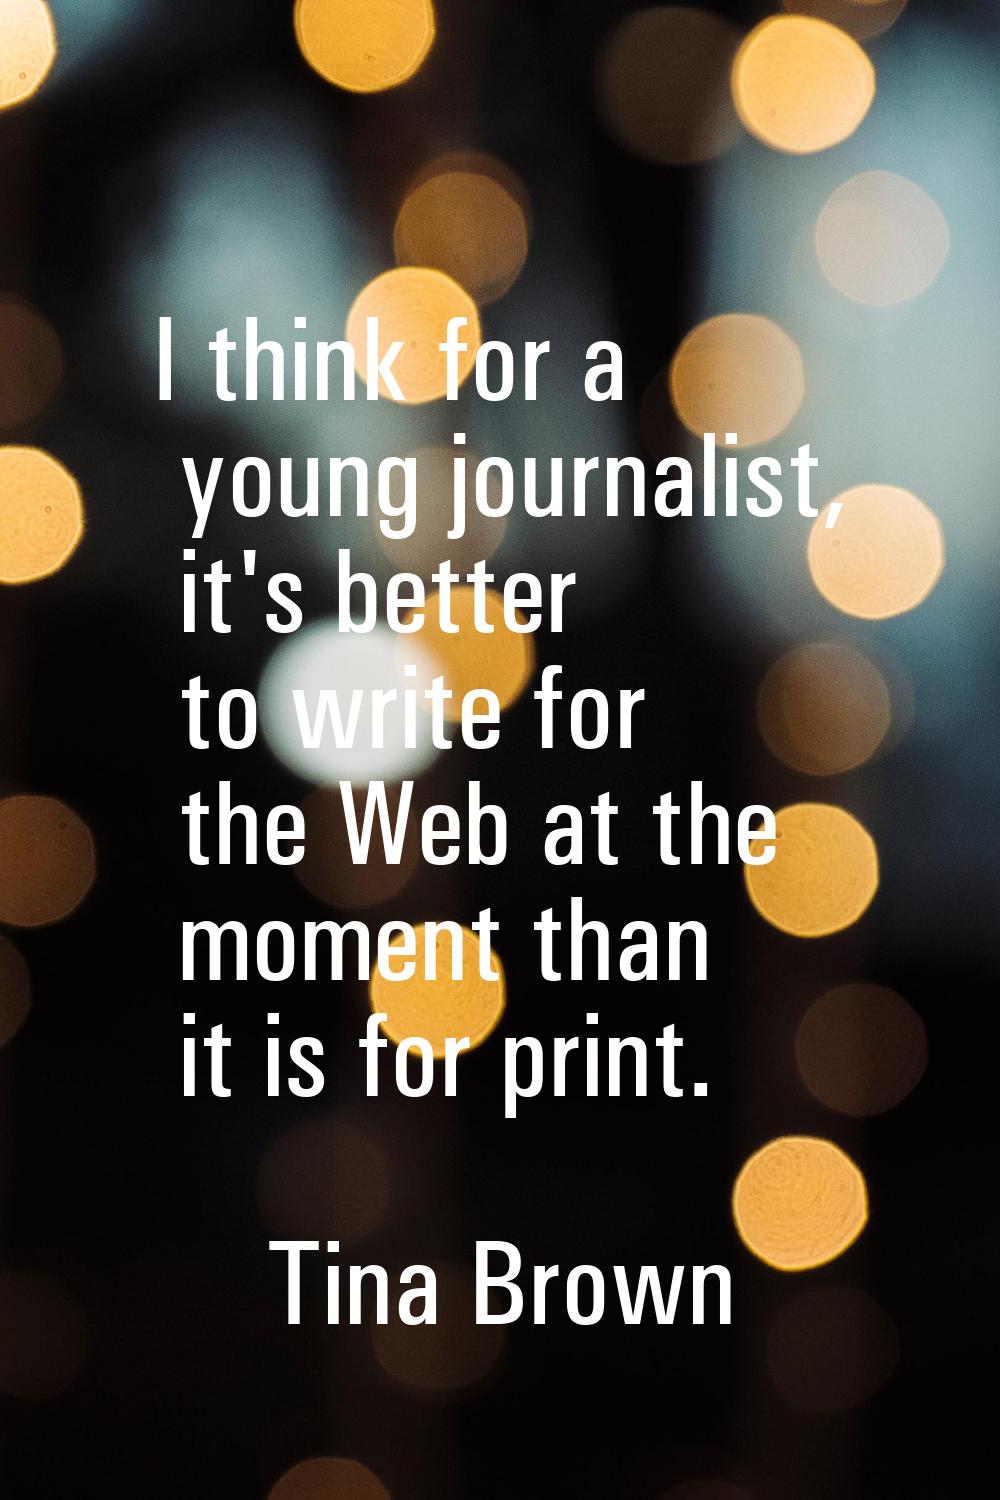 I think for a young journalist, it's better to write for the Web at the moment than it is for print